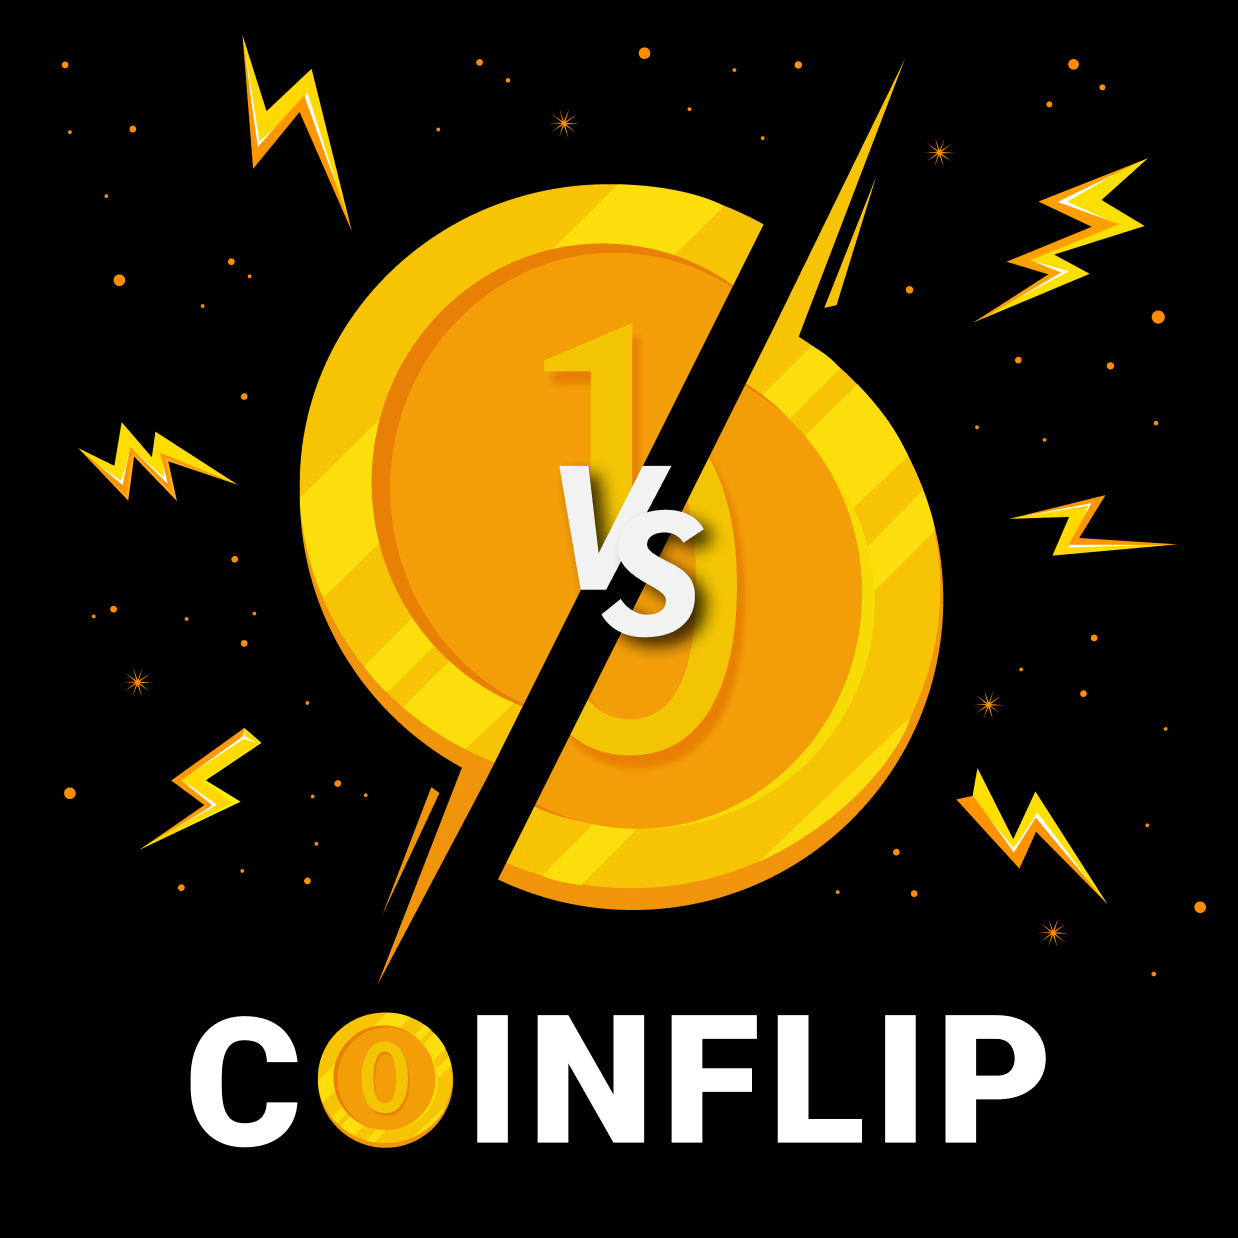 Coinflip